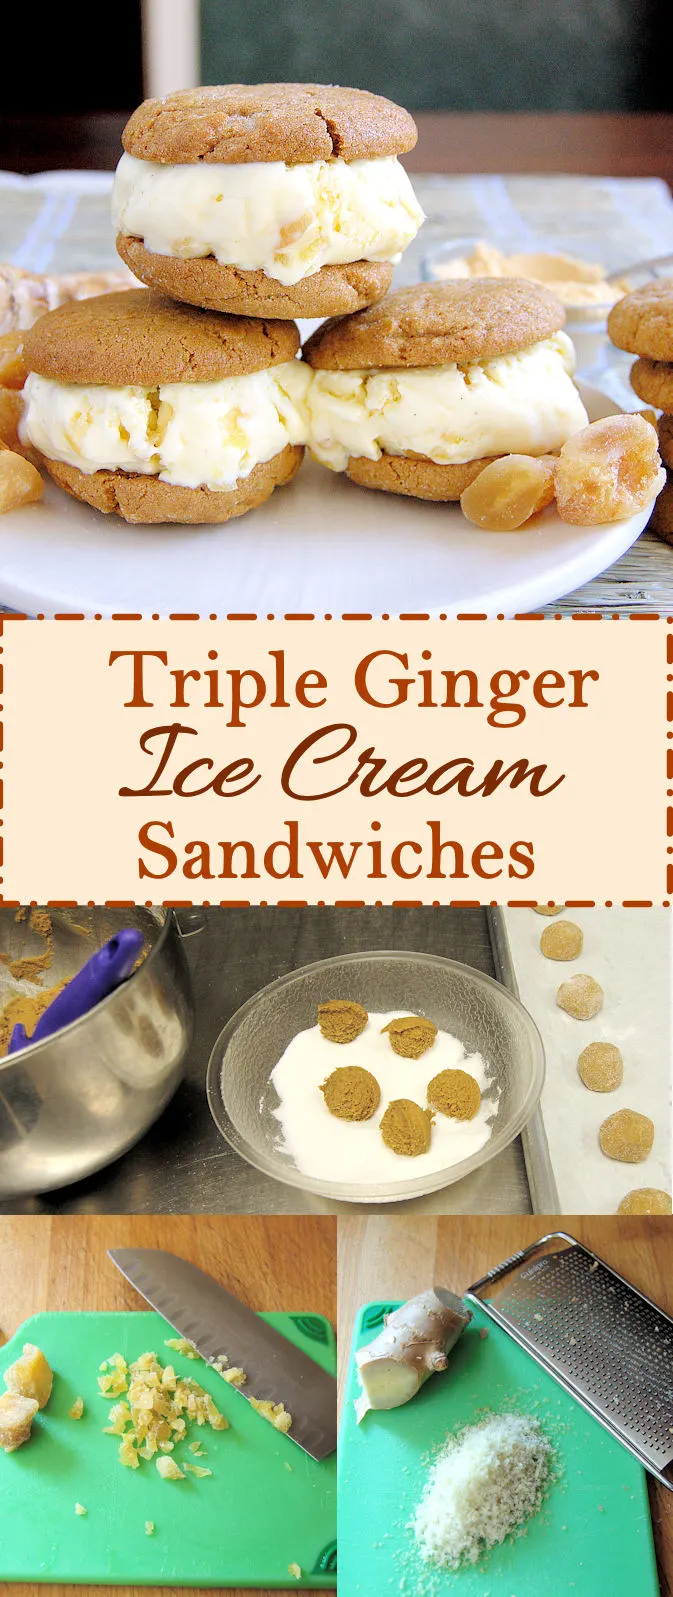 Homemade ginger ice cream sandwiched between ginger cookies. Super easy to make ahead. Create your own ice cream sandwich bar at your next party.